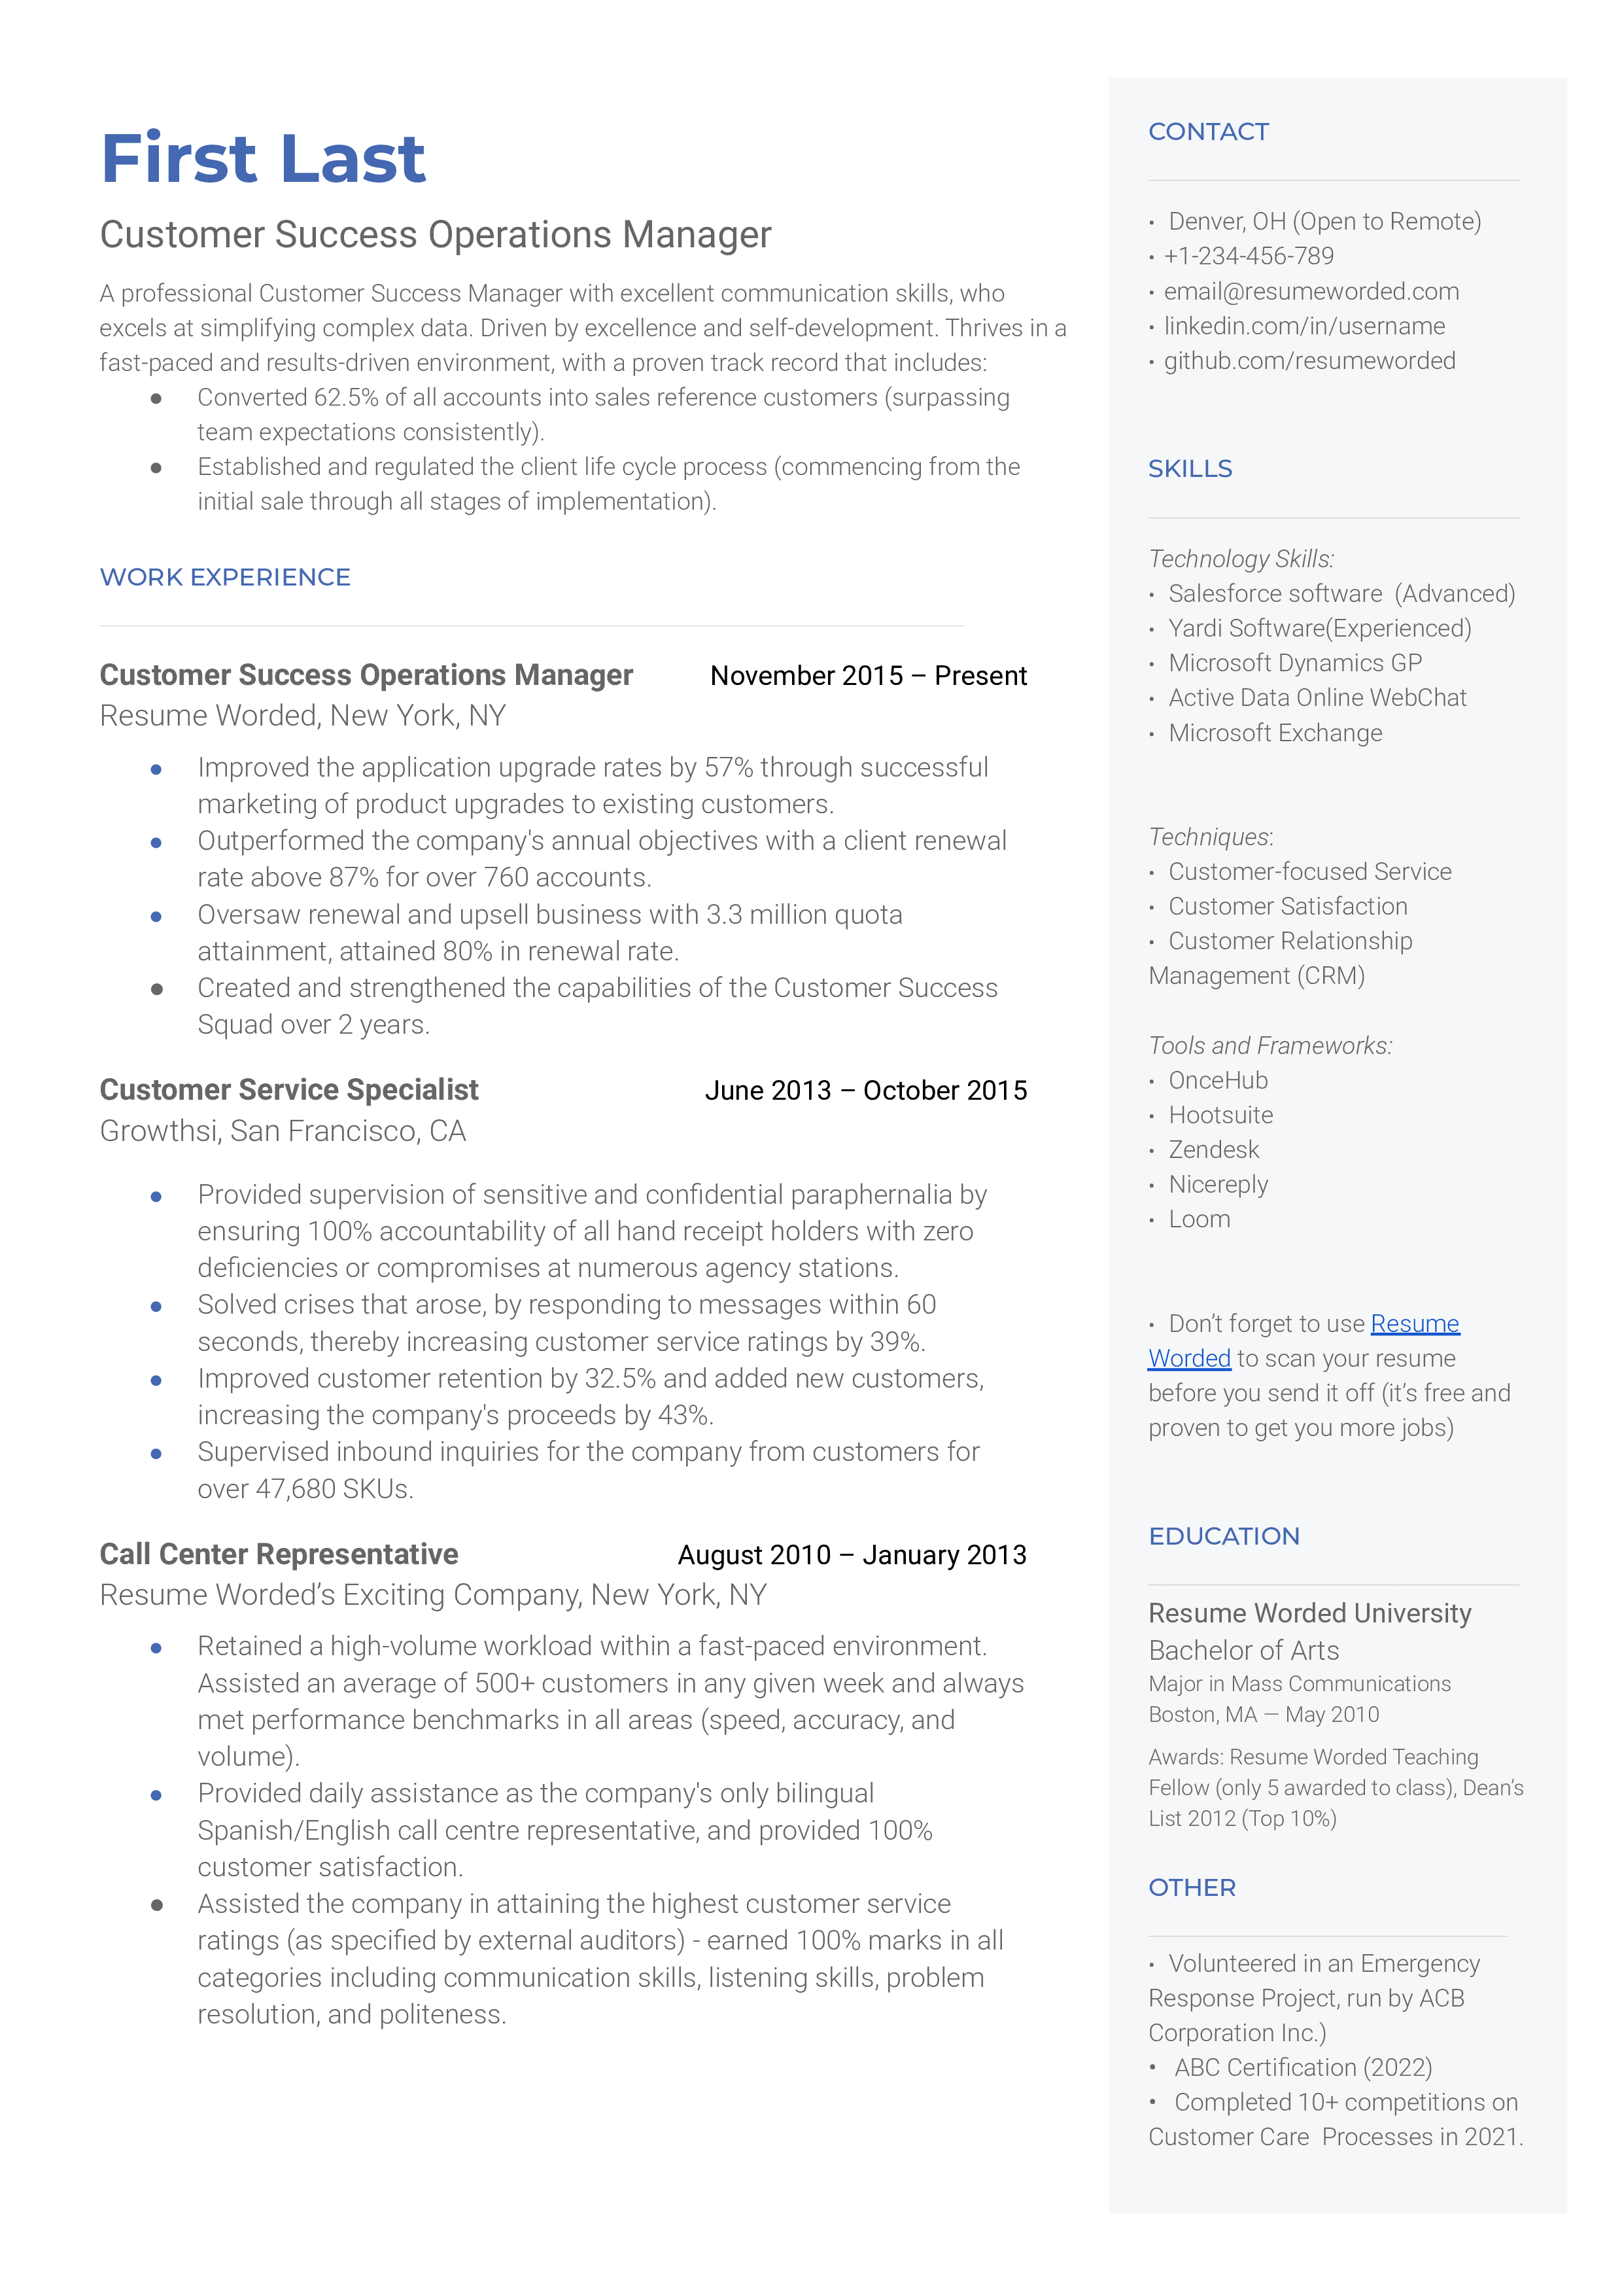 A Customer Success Operations Manager Resume showcasing technical skills and CS techniques accompanied by demonstrable experience.